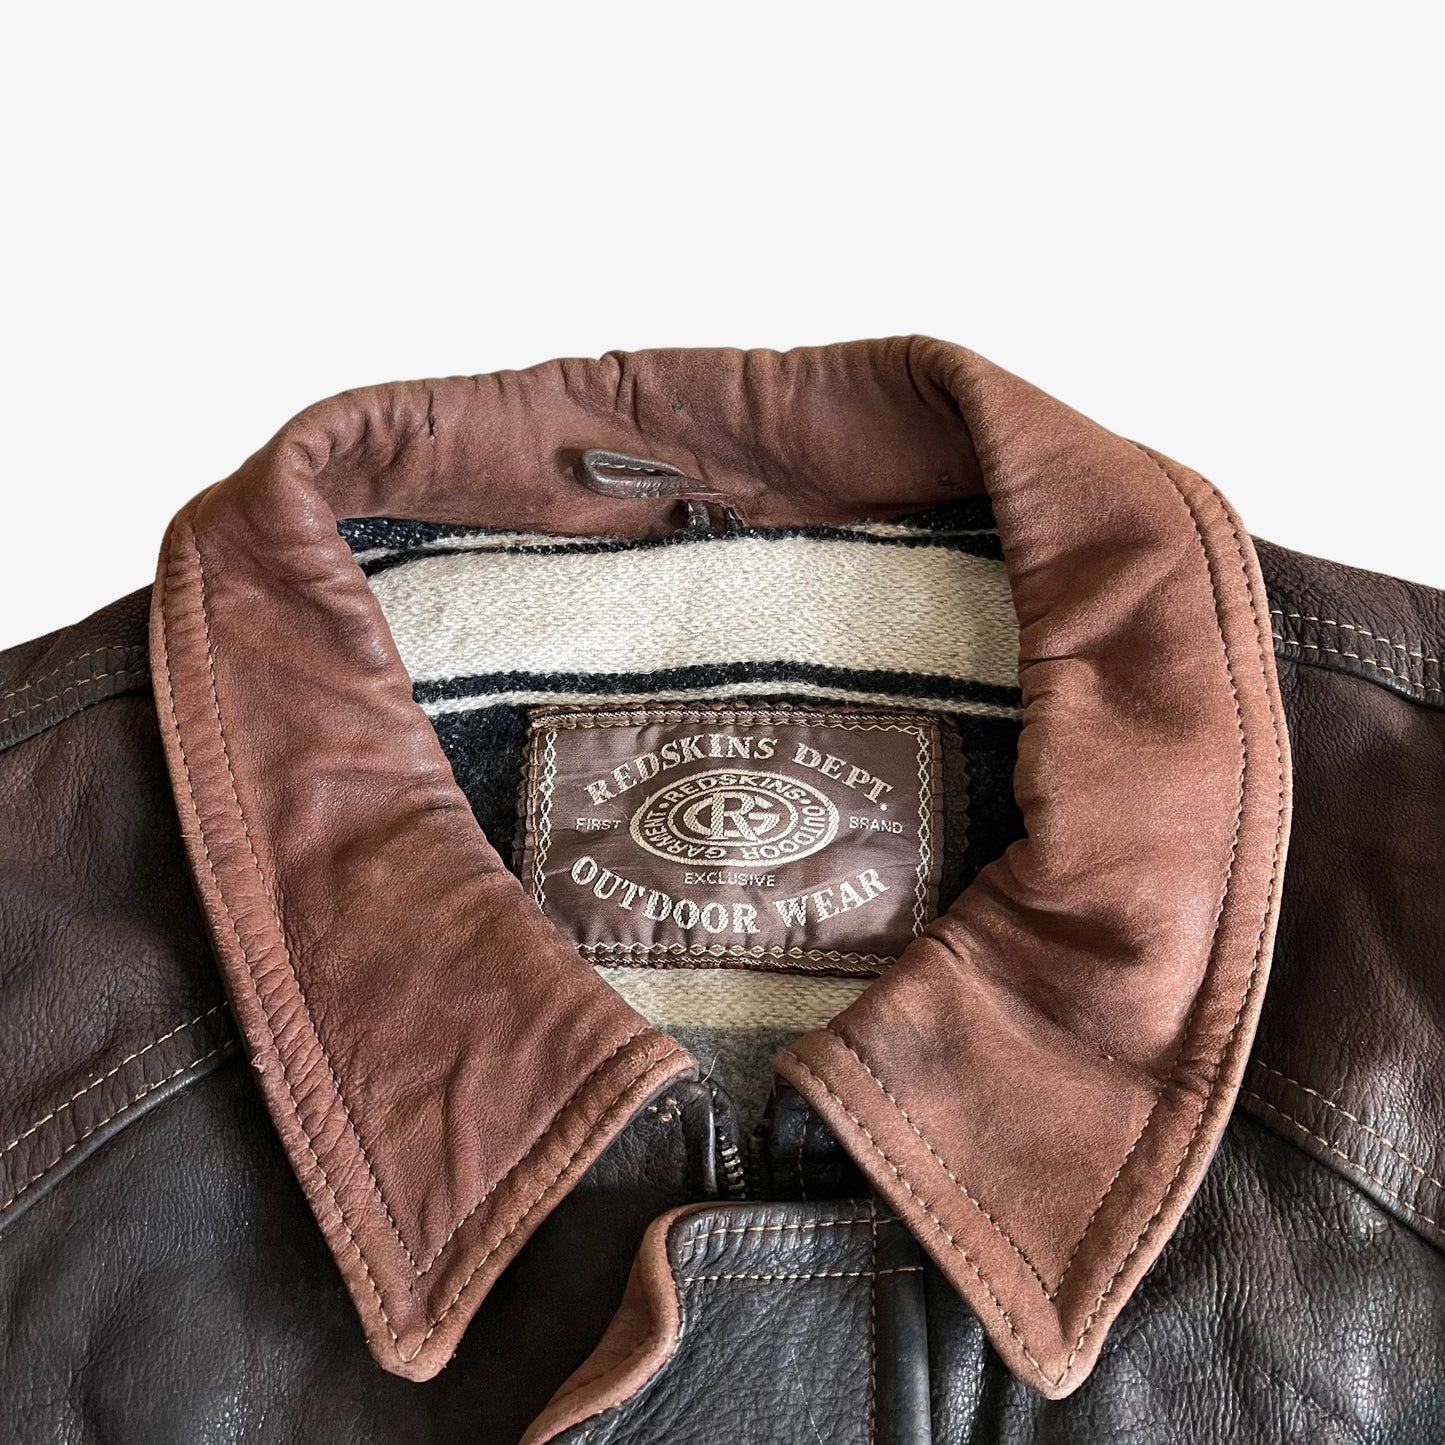 Vintage 90s Redskins Dept Brown Leather Jacket With Toggle Fasteners Label - Casspios Dream